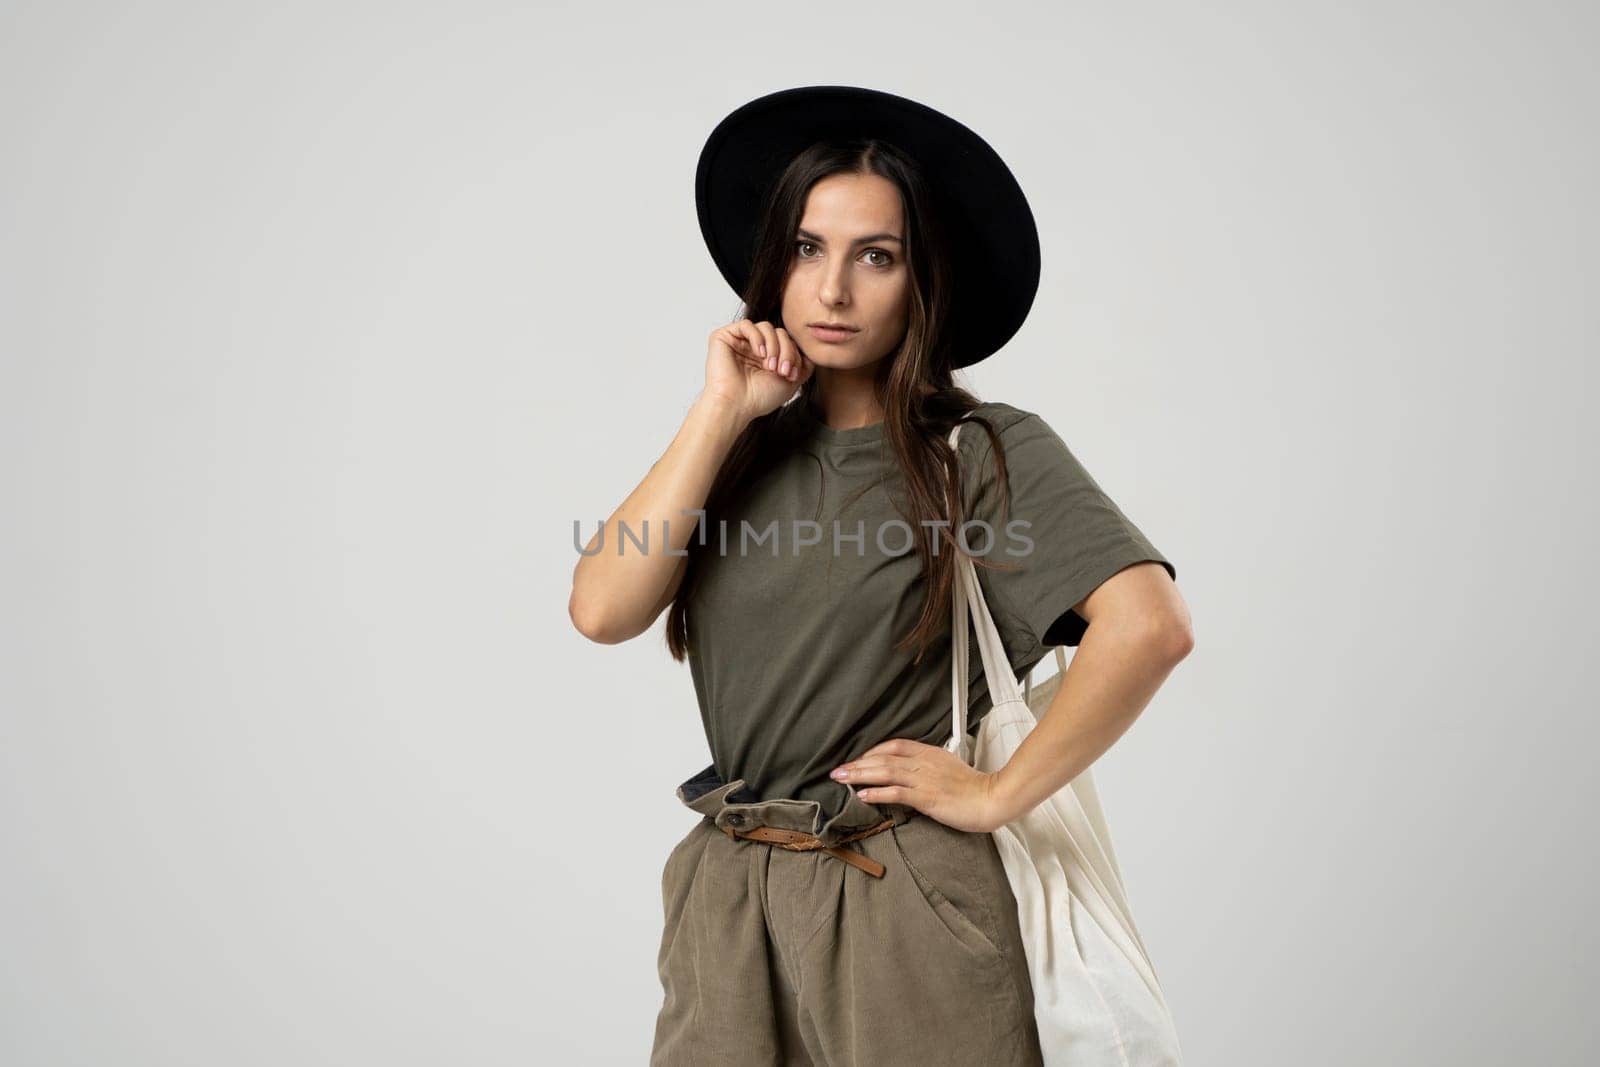 Young woman in a green t-shirt and black hat with white cotton bag